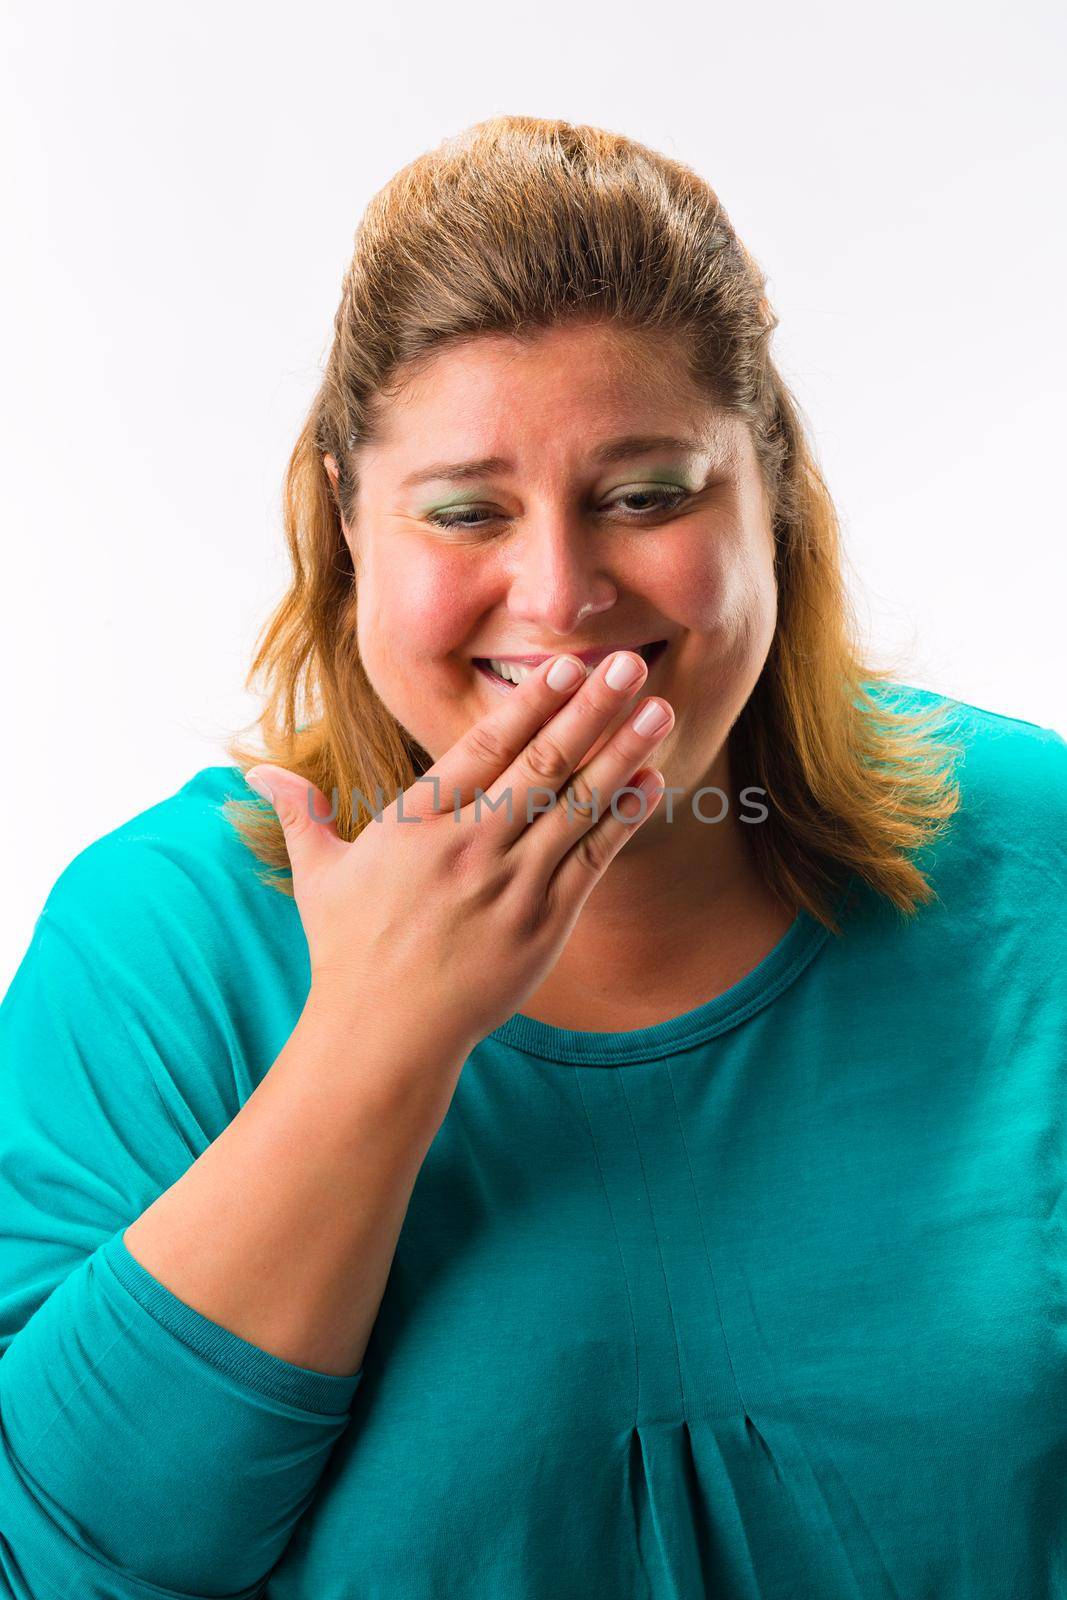 Portrait of fat happy woman laughing against white background